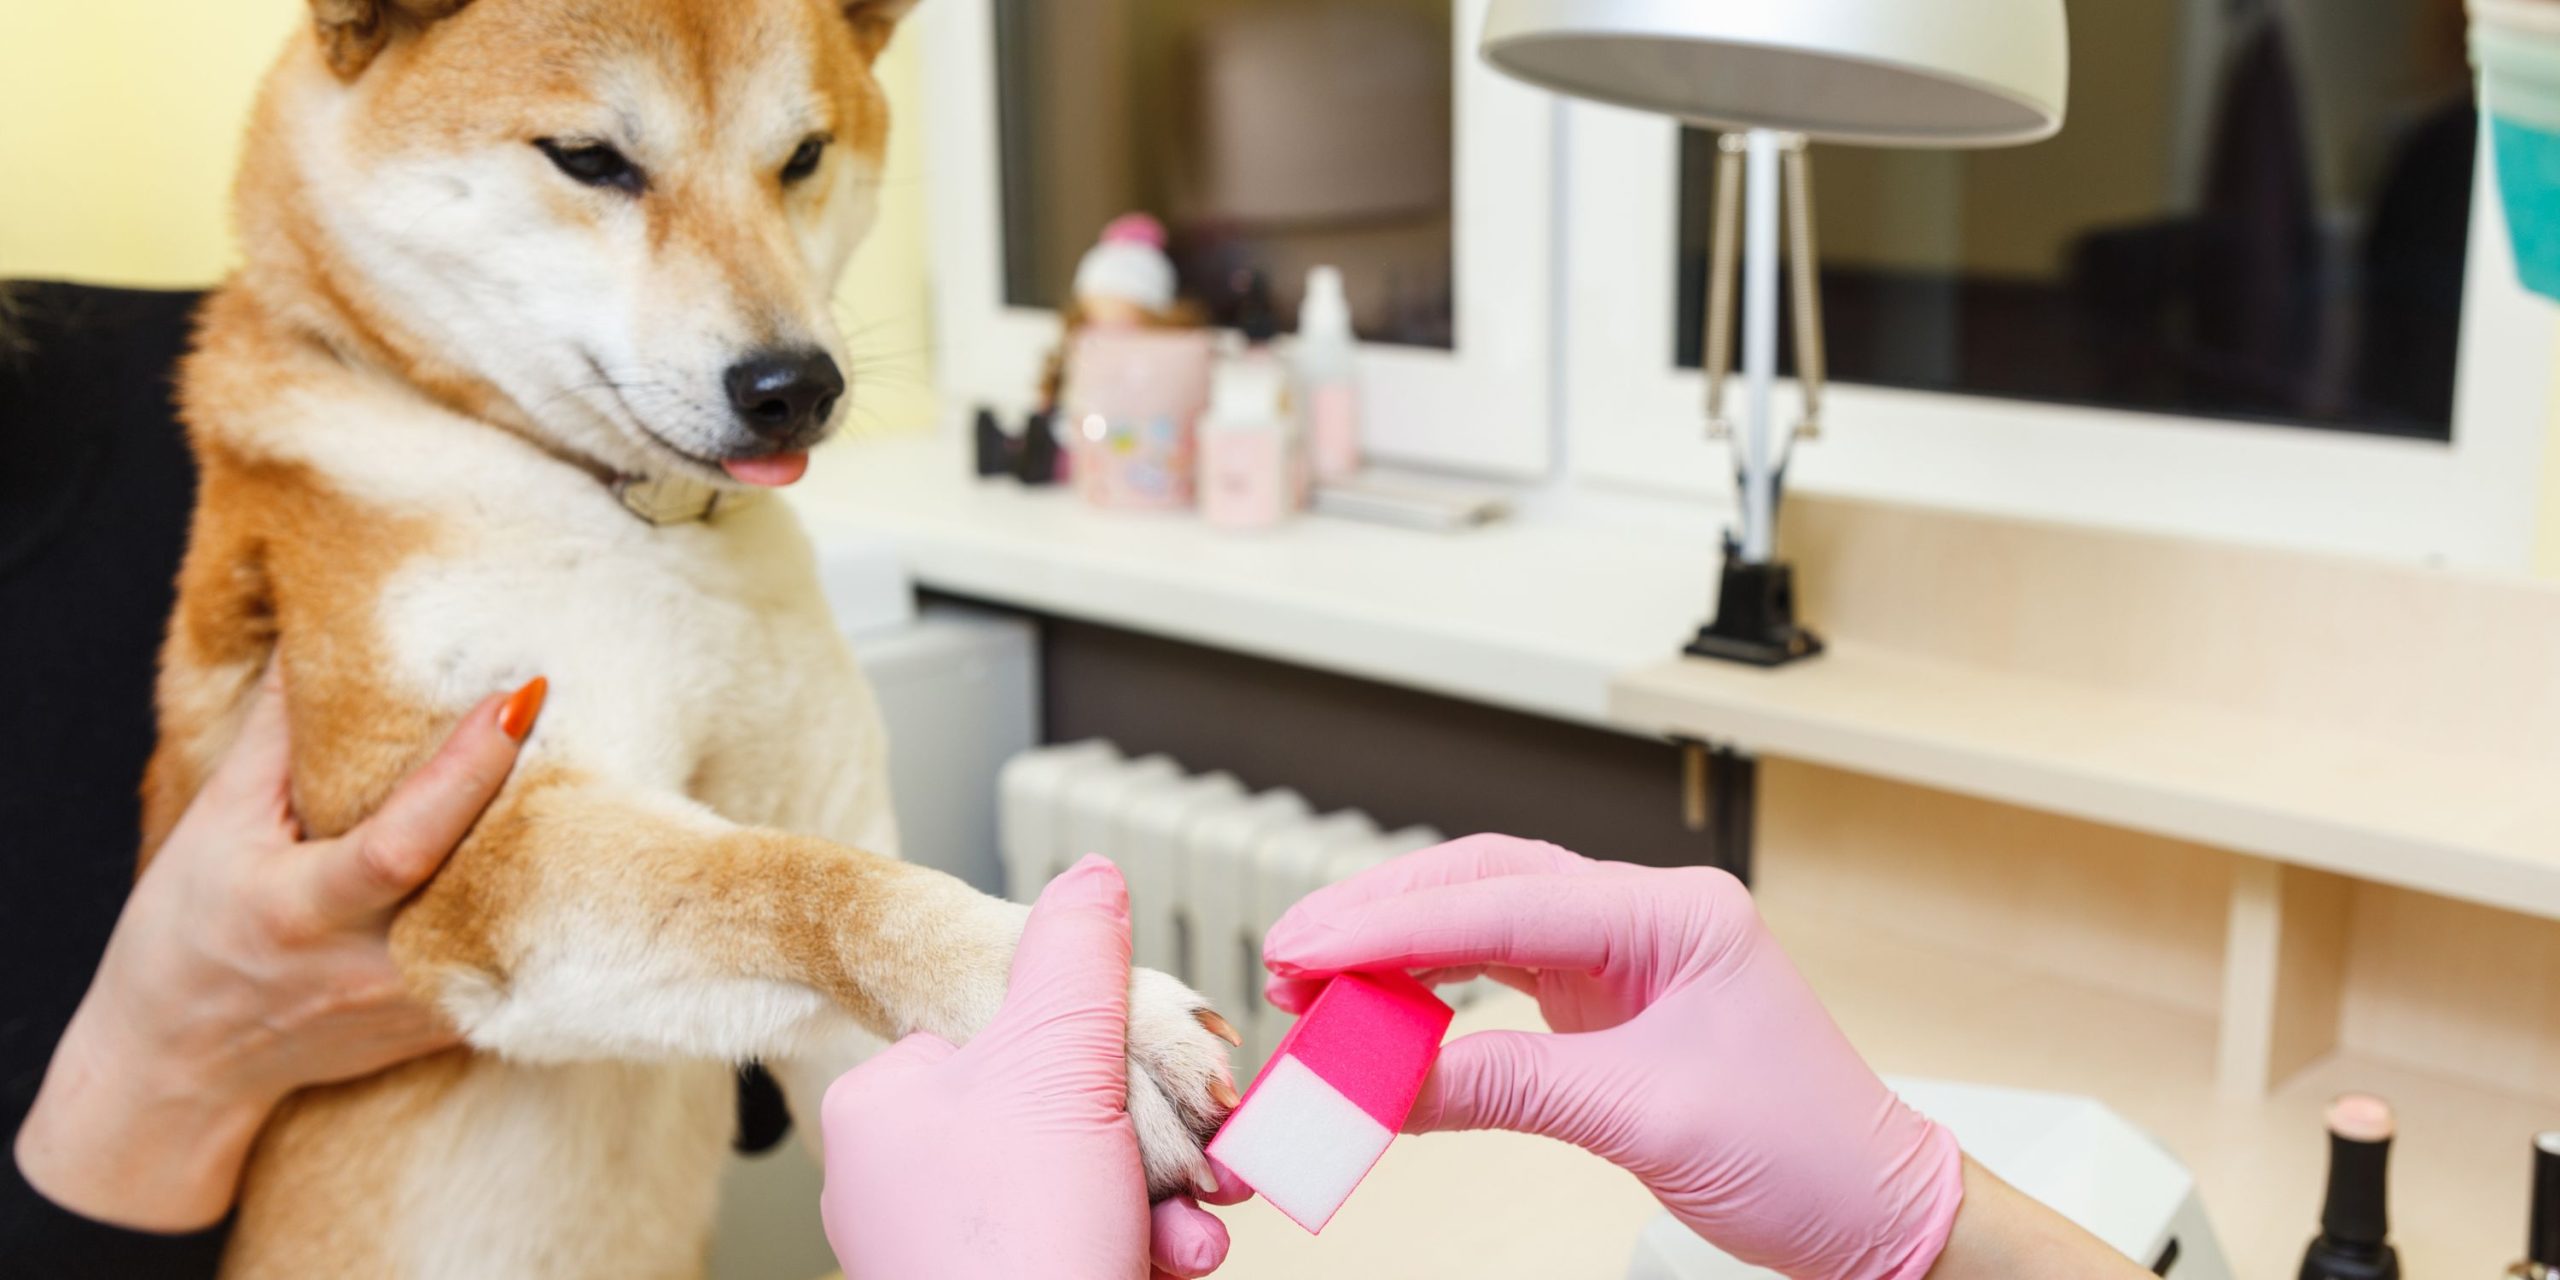 How To Make Dog-safe Nail Polish + Top 3 Best Nail Polish for Dogs